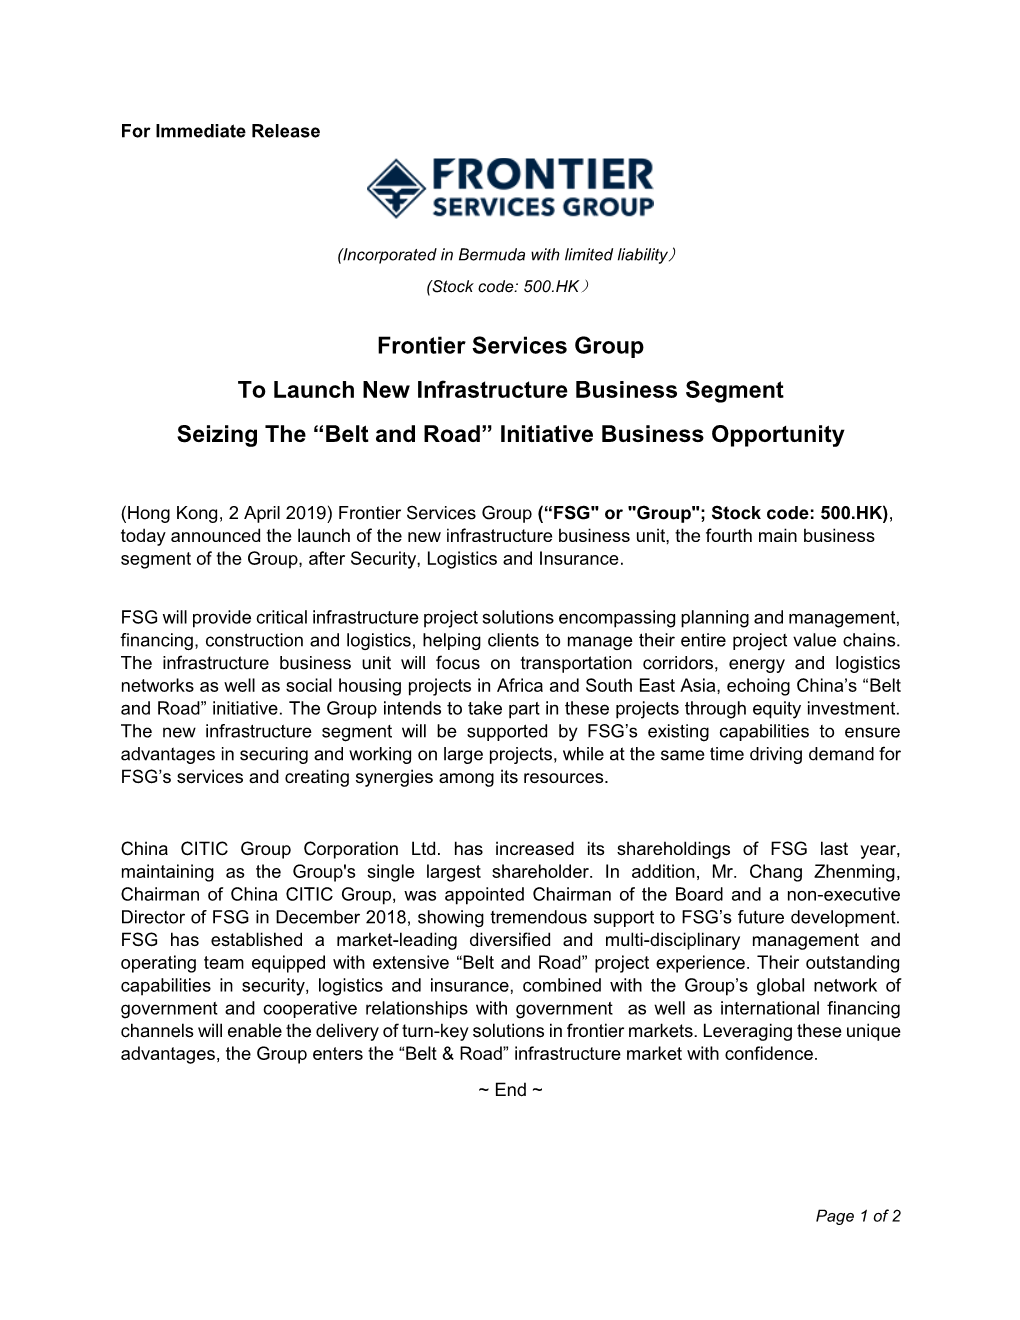 Frontier Services Group to Launch New Infrastructure Business Segment Seizing the “Belt and Road” Initiative Business Opportunity